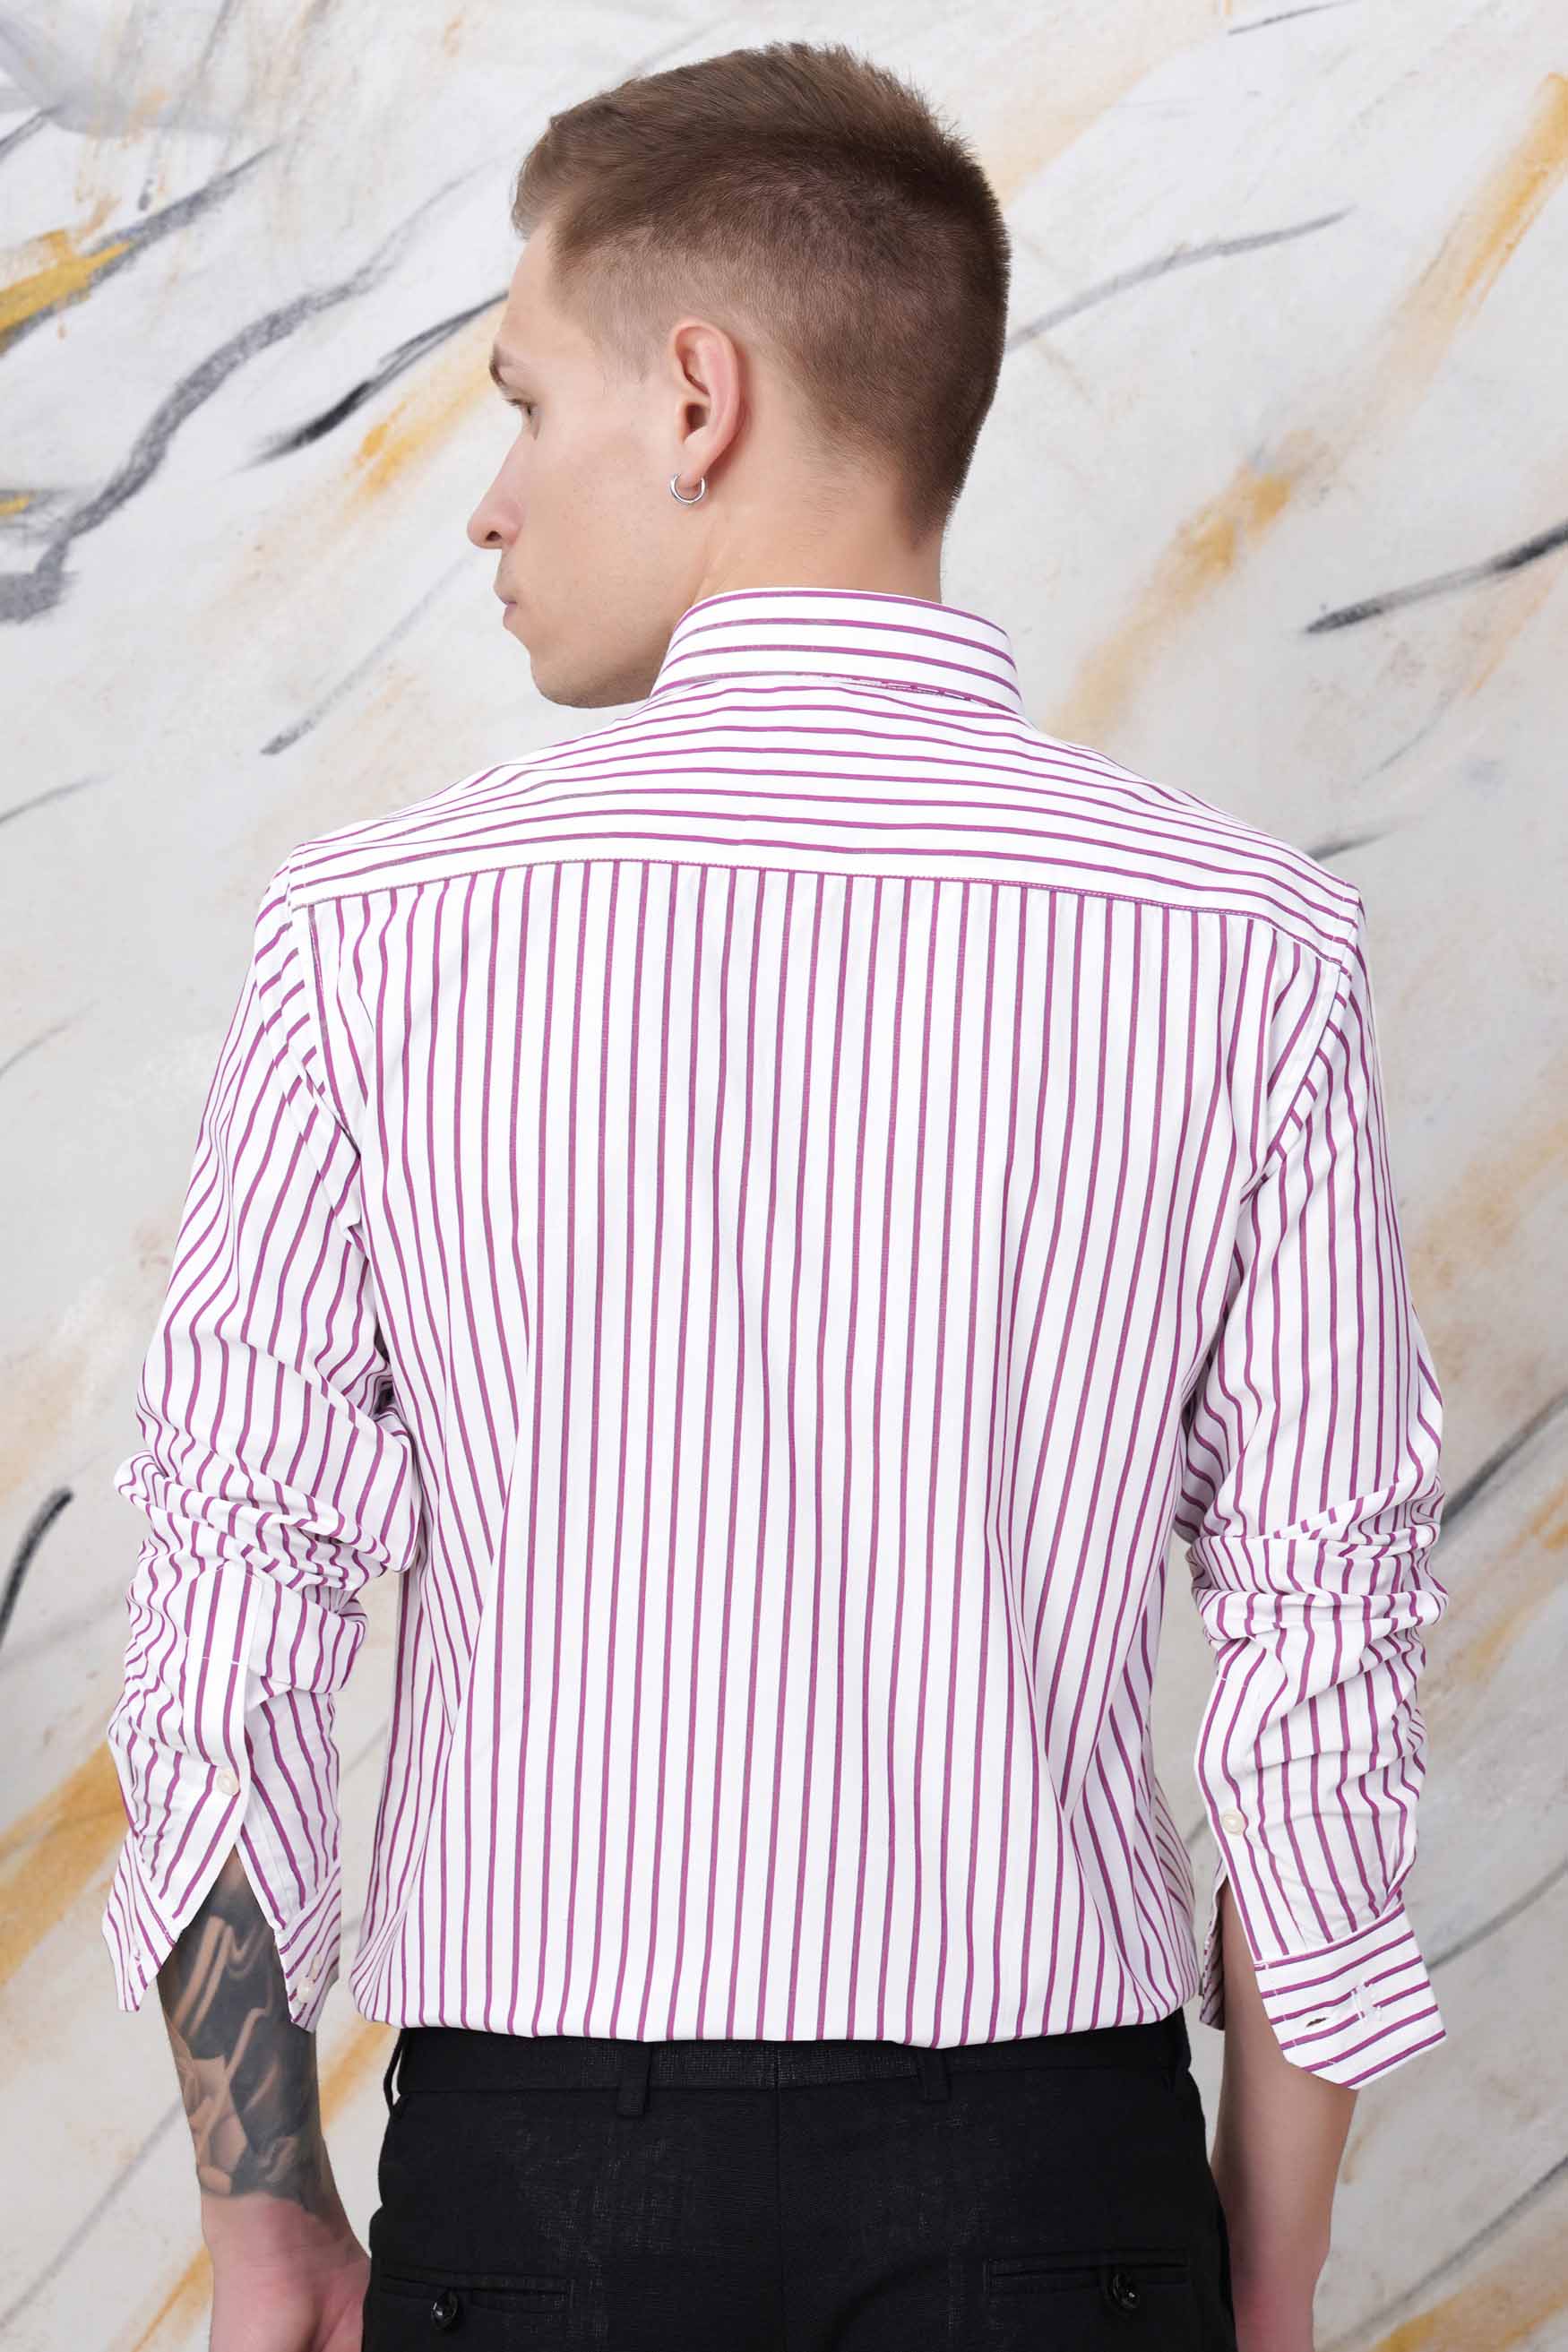 Bright White and Pansy Pink Striped Premium Cotton Shirt 11492-CA-38, 11492-CA-H-38, 11492-CA-39, 11492-CA-H-39, 11492-CA-40, 11492-CA-H-40, 11492-CA-42, 11492-CA-H-42, 11492-CA-44, 11492-CA-H-44, 11492-CA-46, 11492-CA-H-46, 11492-CA-48, 11492-CA-H-48, 11492-CA-50, 11492-CA-H-50, 11492-CA-52, 11492-CA-H-52